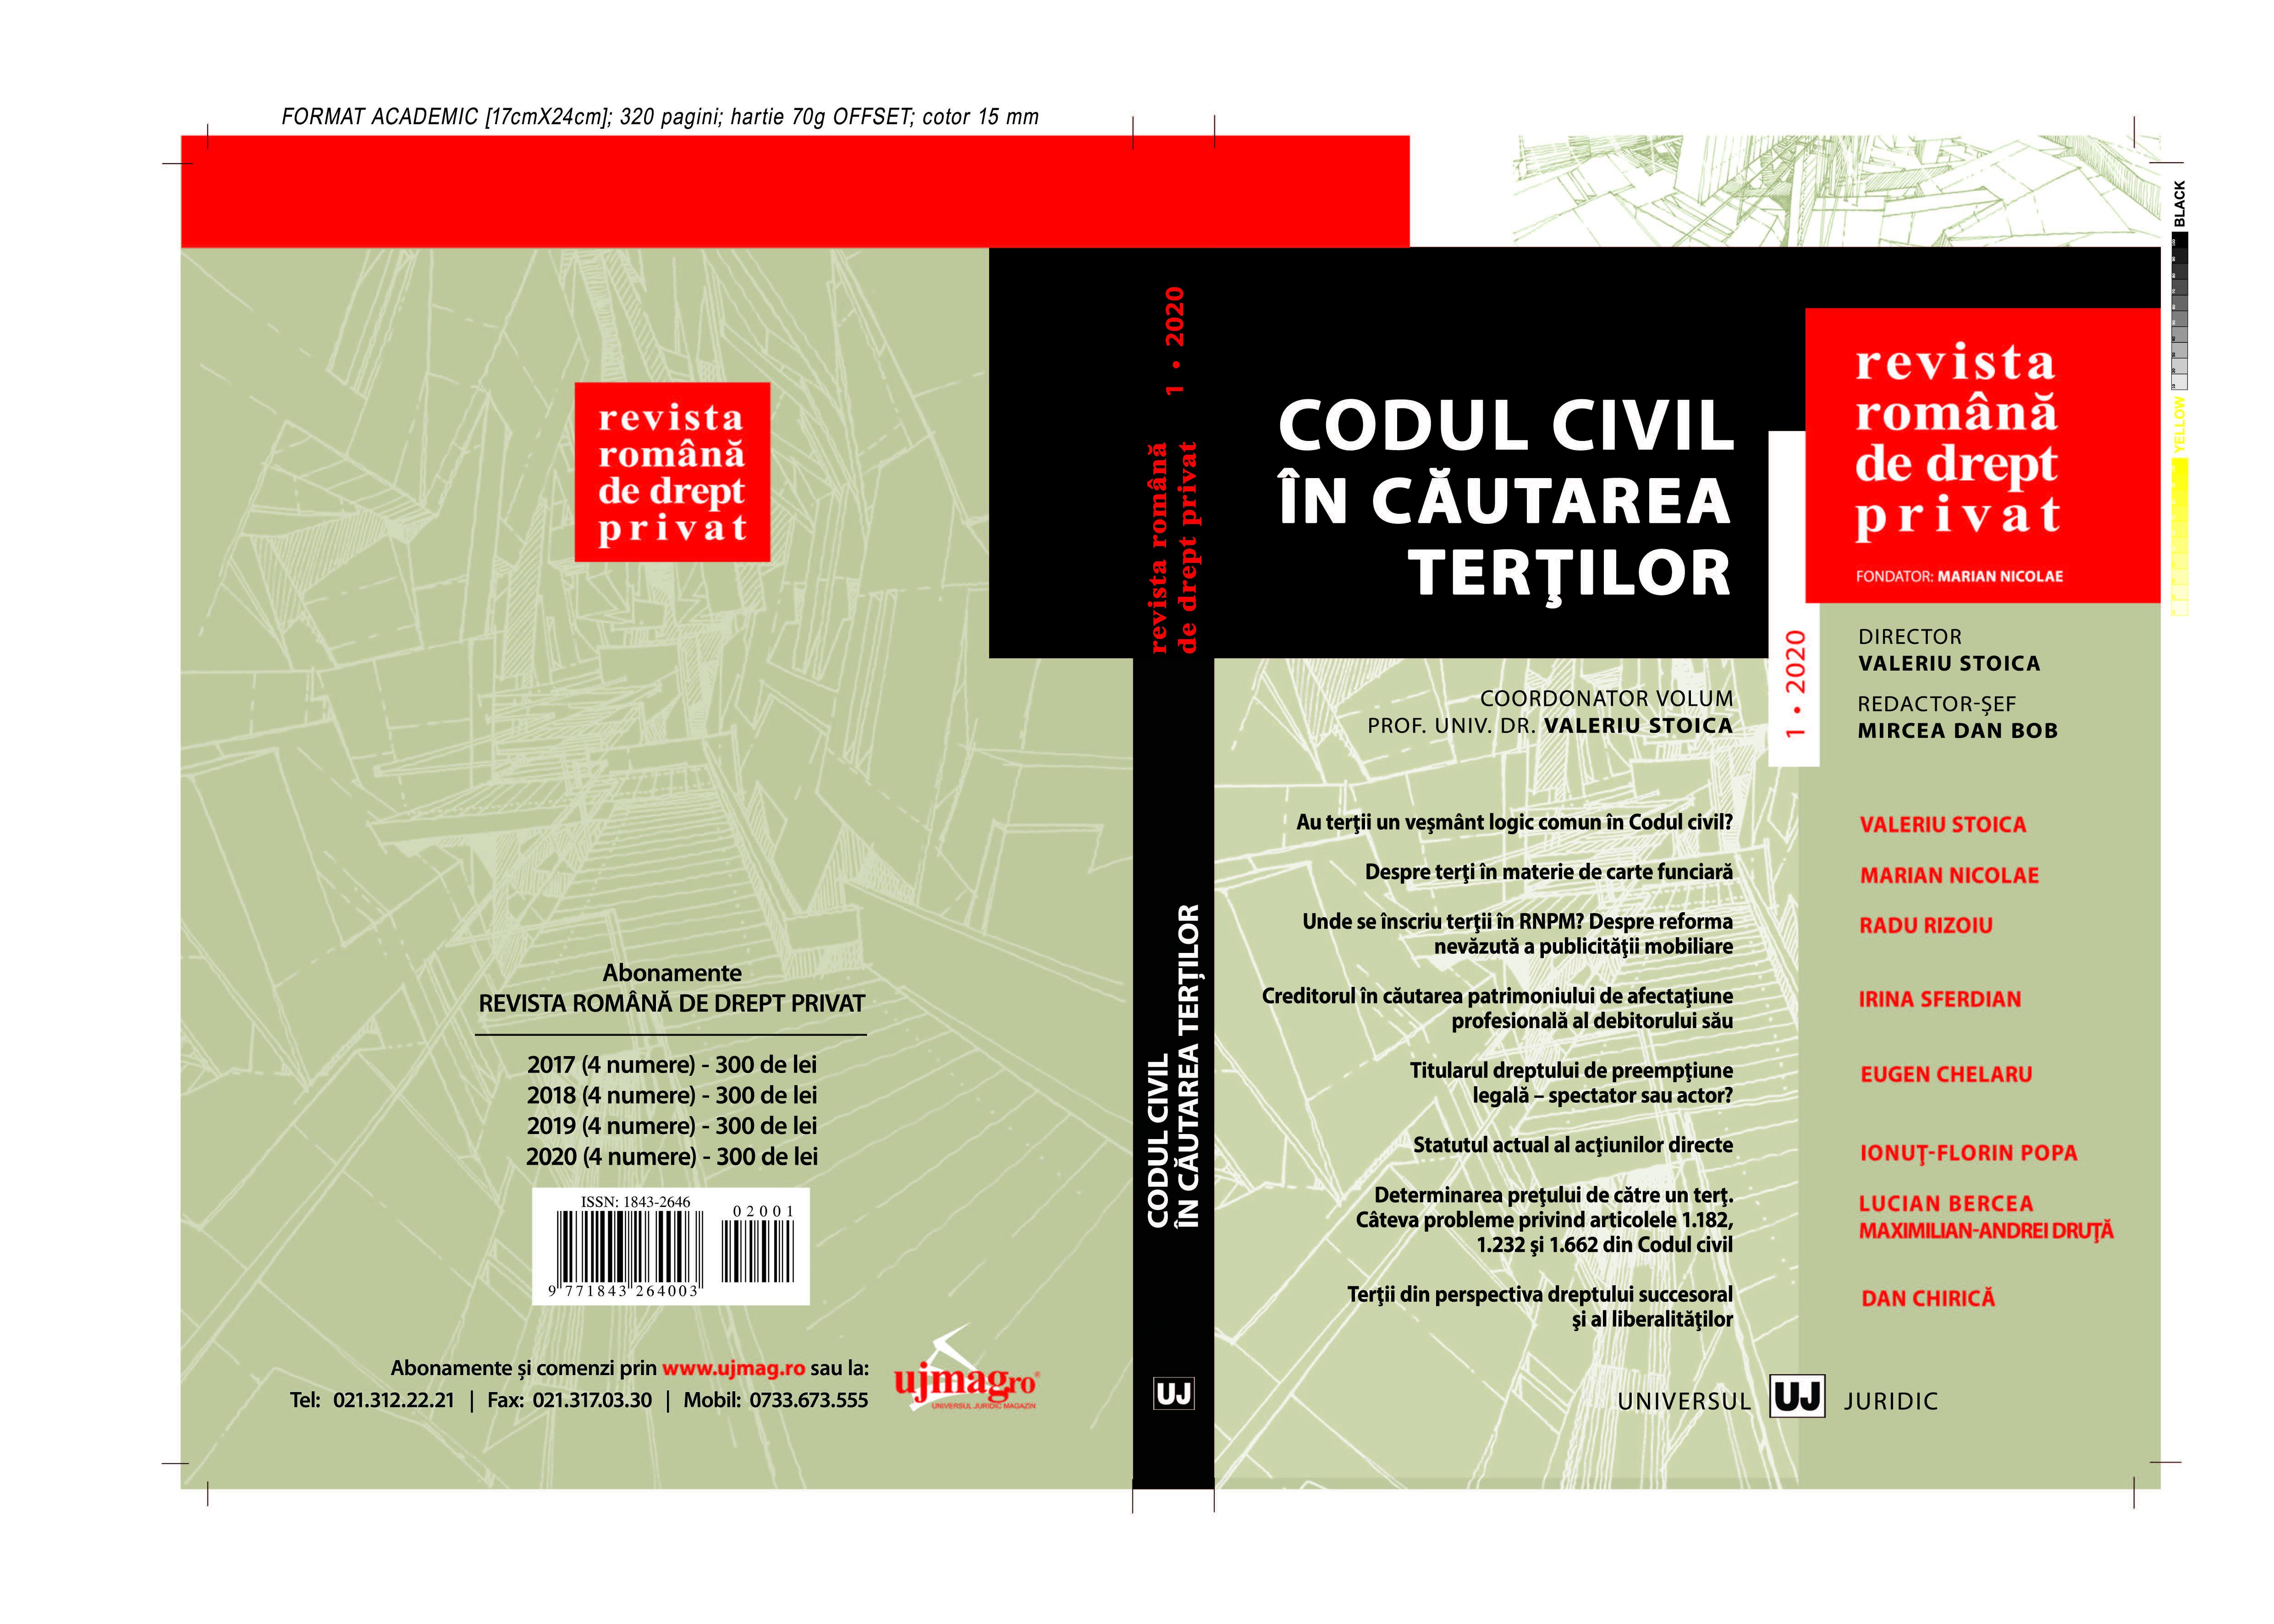 Determination of the price by a third person. Problems regarding articles 1.182, 1.232 and 1.662 of the Romanian Civil Code Cover Image